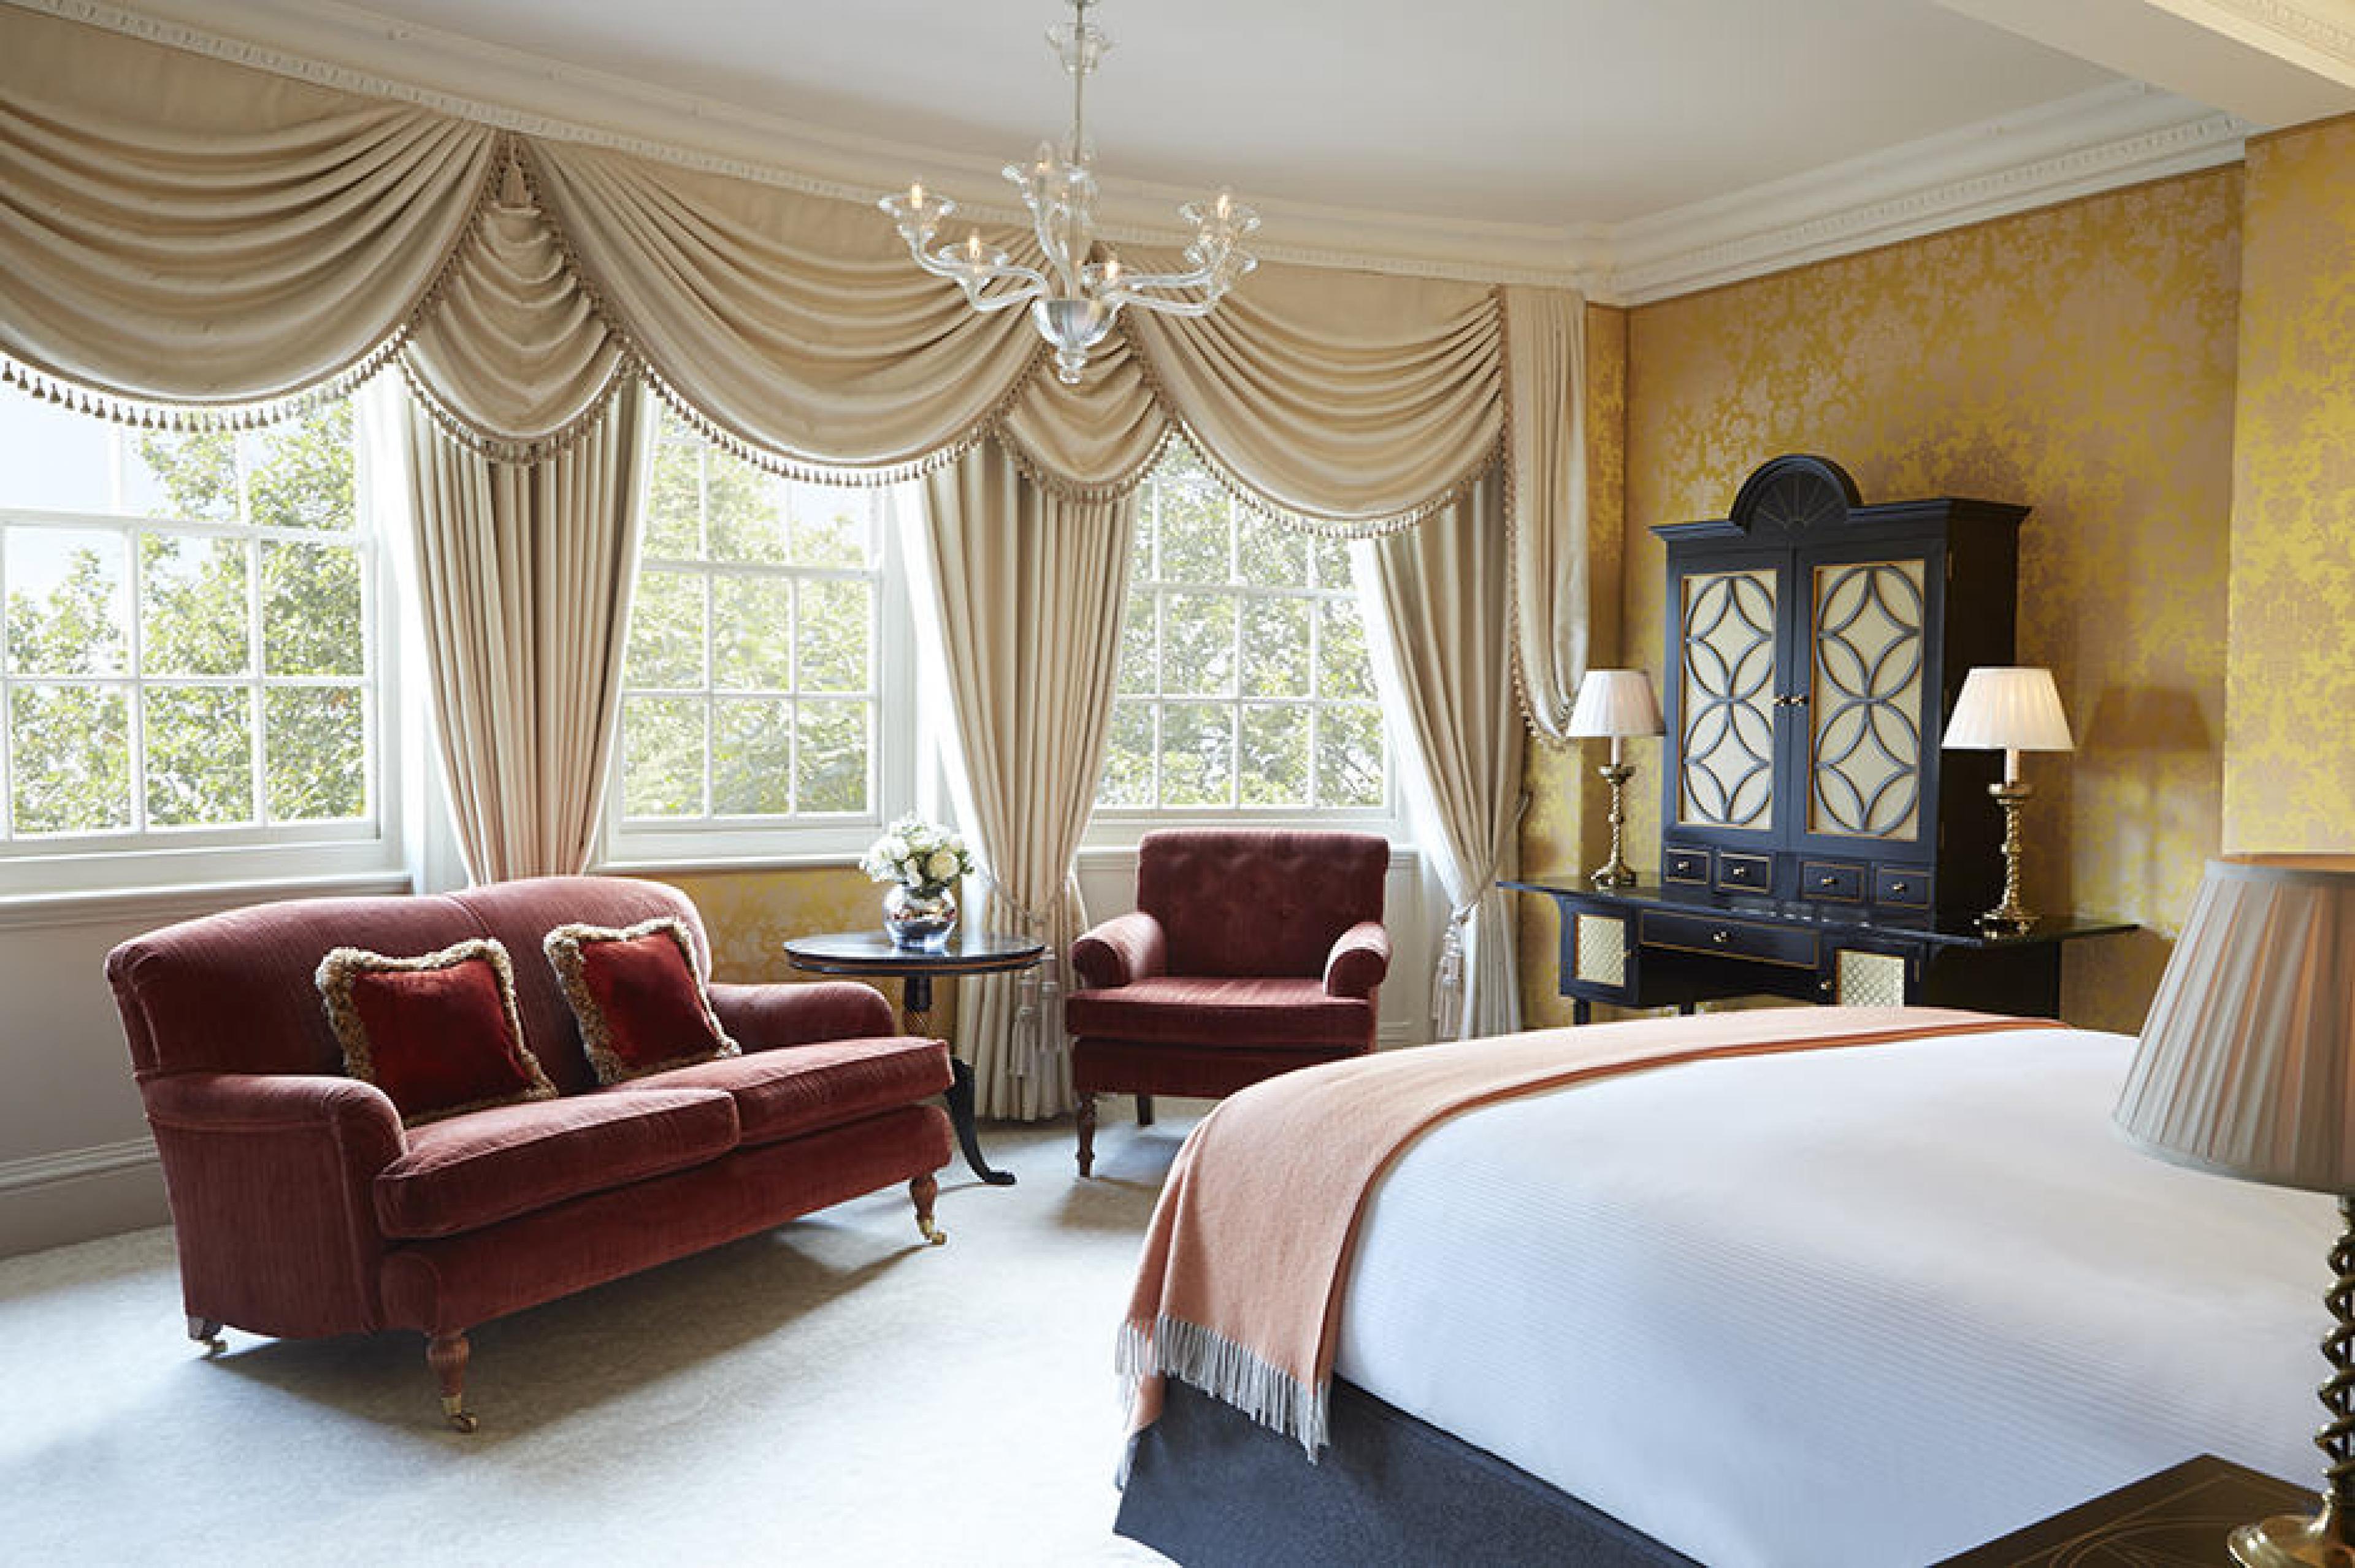 Bedroom at The Goring, London, England